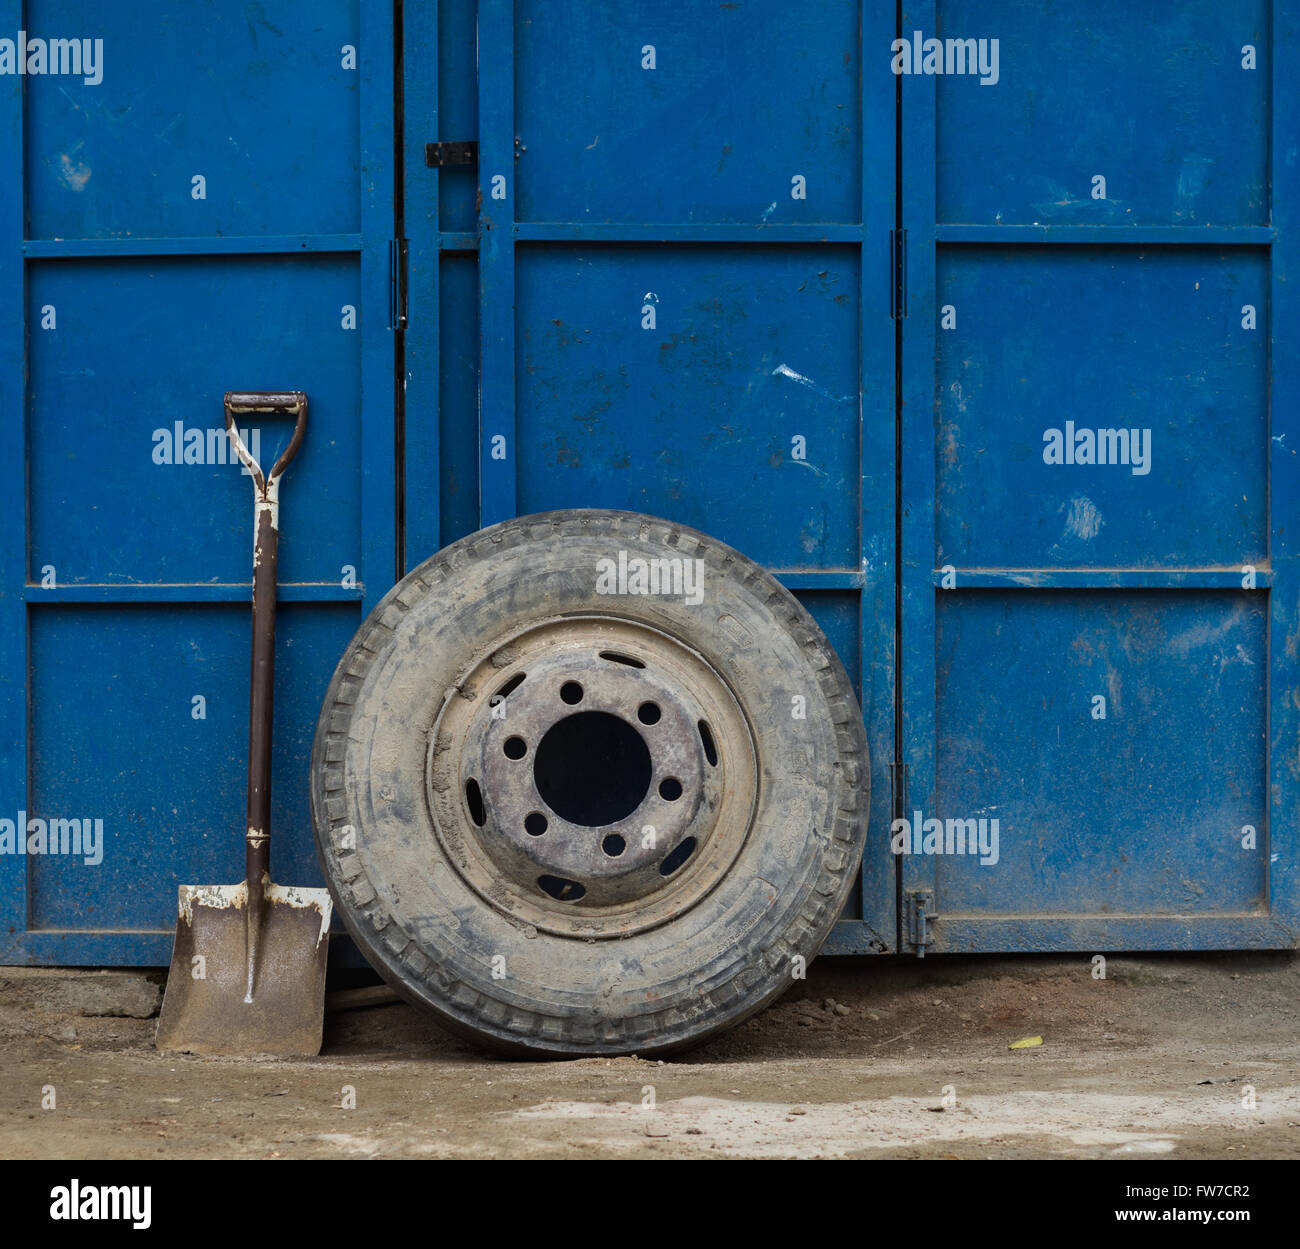 Truck wheel and a shovel on background of garage doors Stock Photo